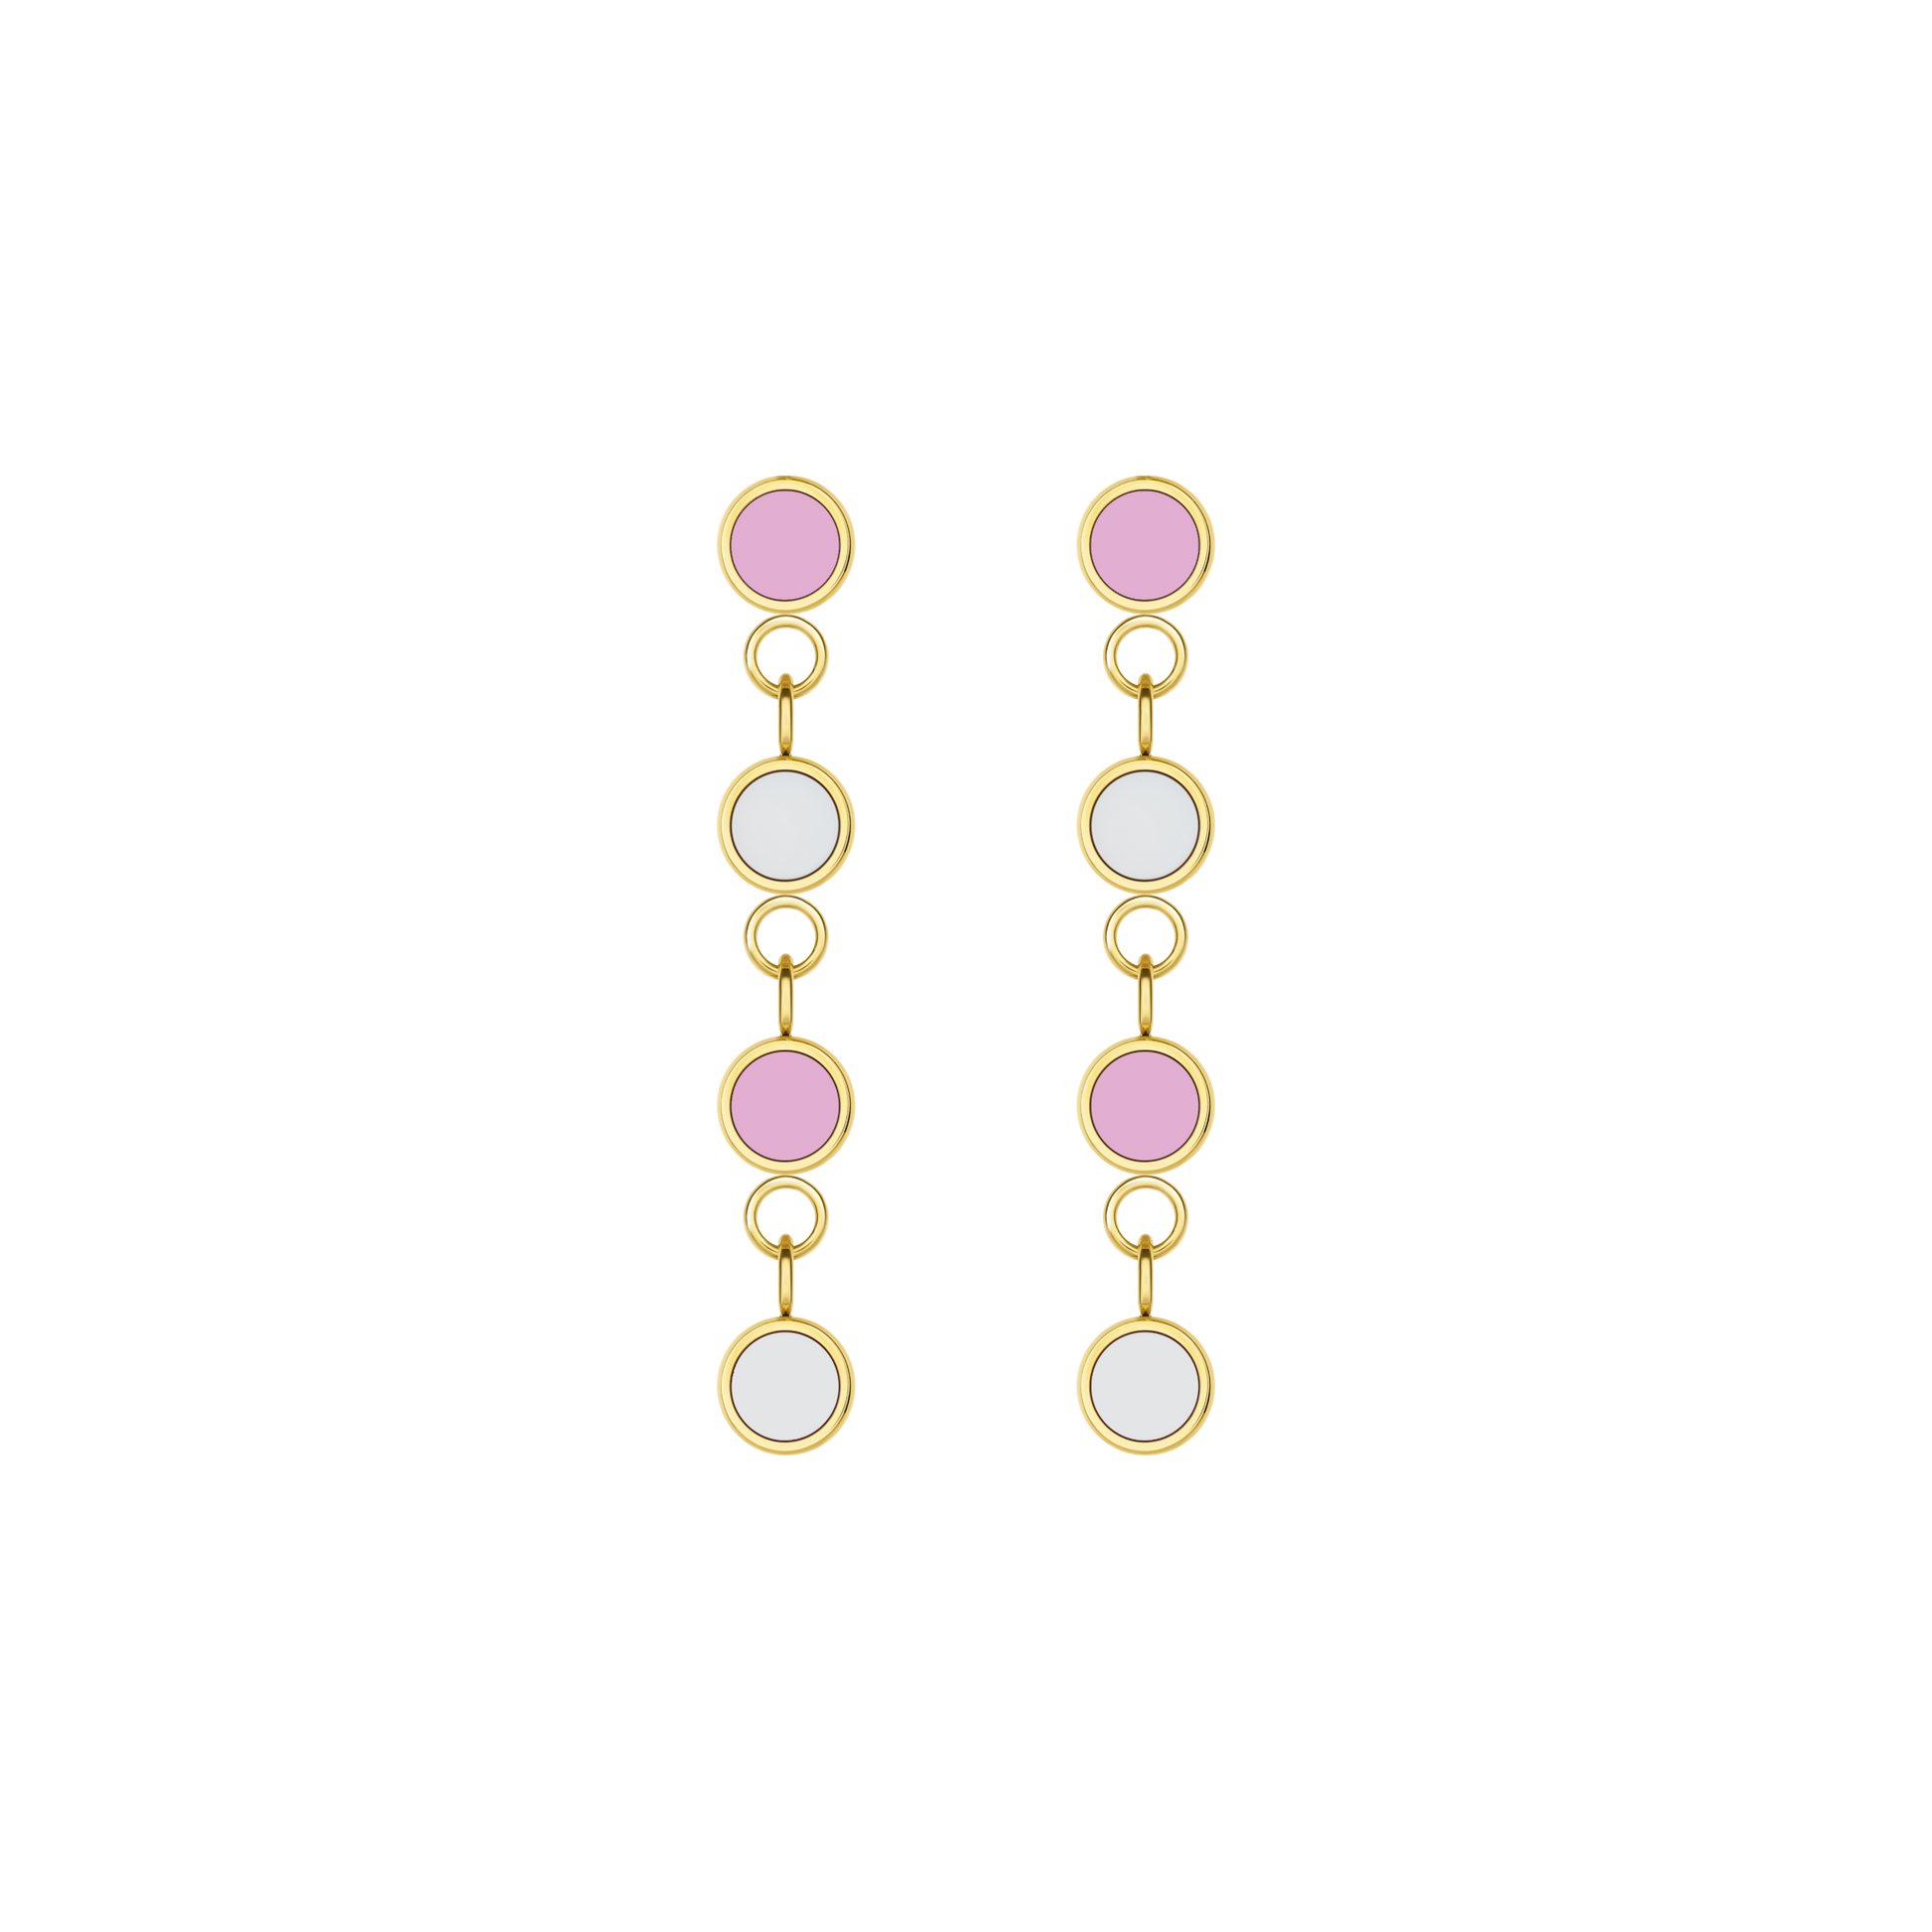 NEW WAVE CASCADE 4 FONDANT PINK AND WHITE CHIPS EARRING